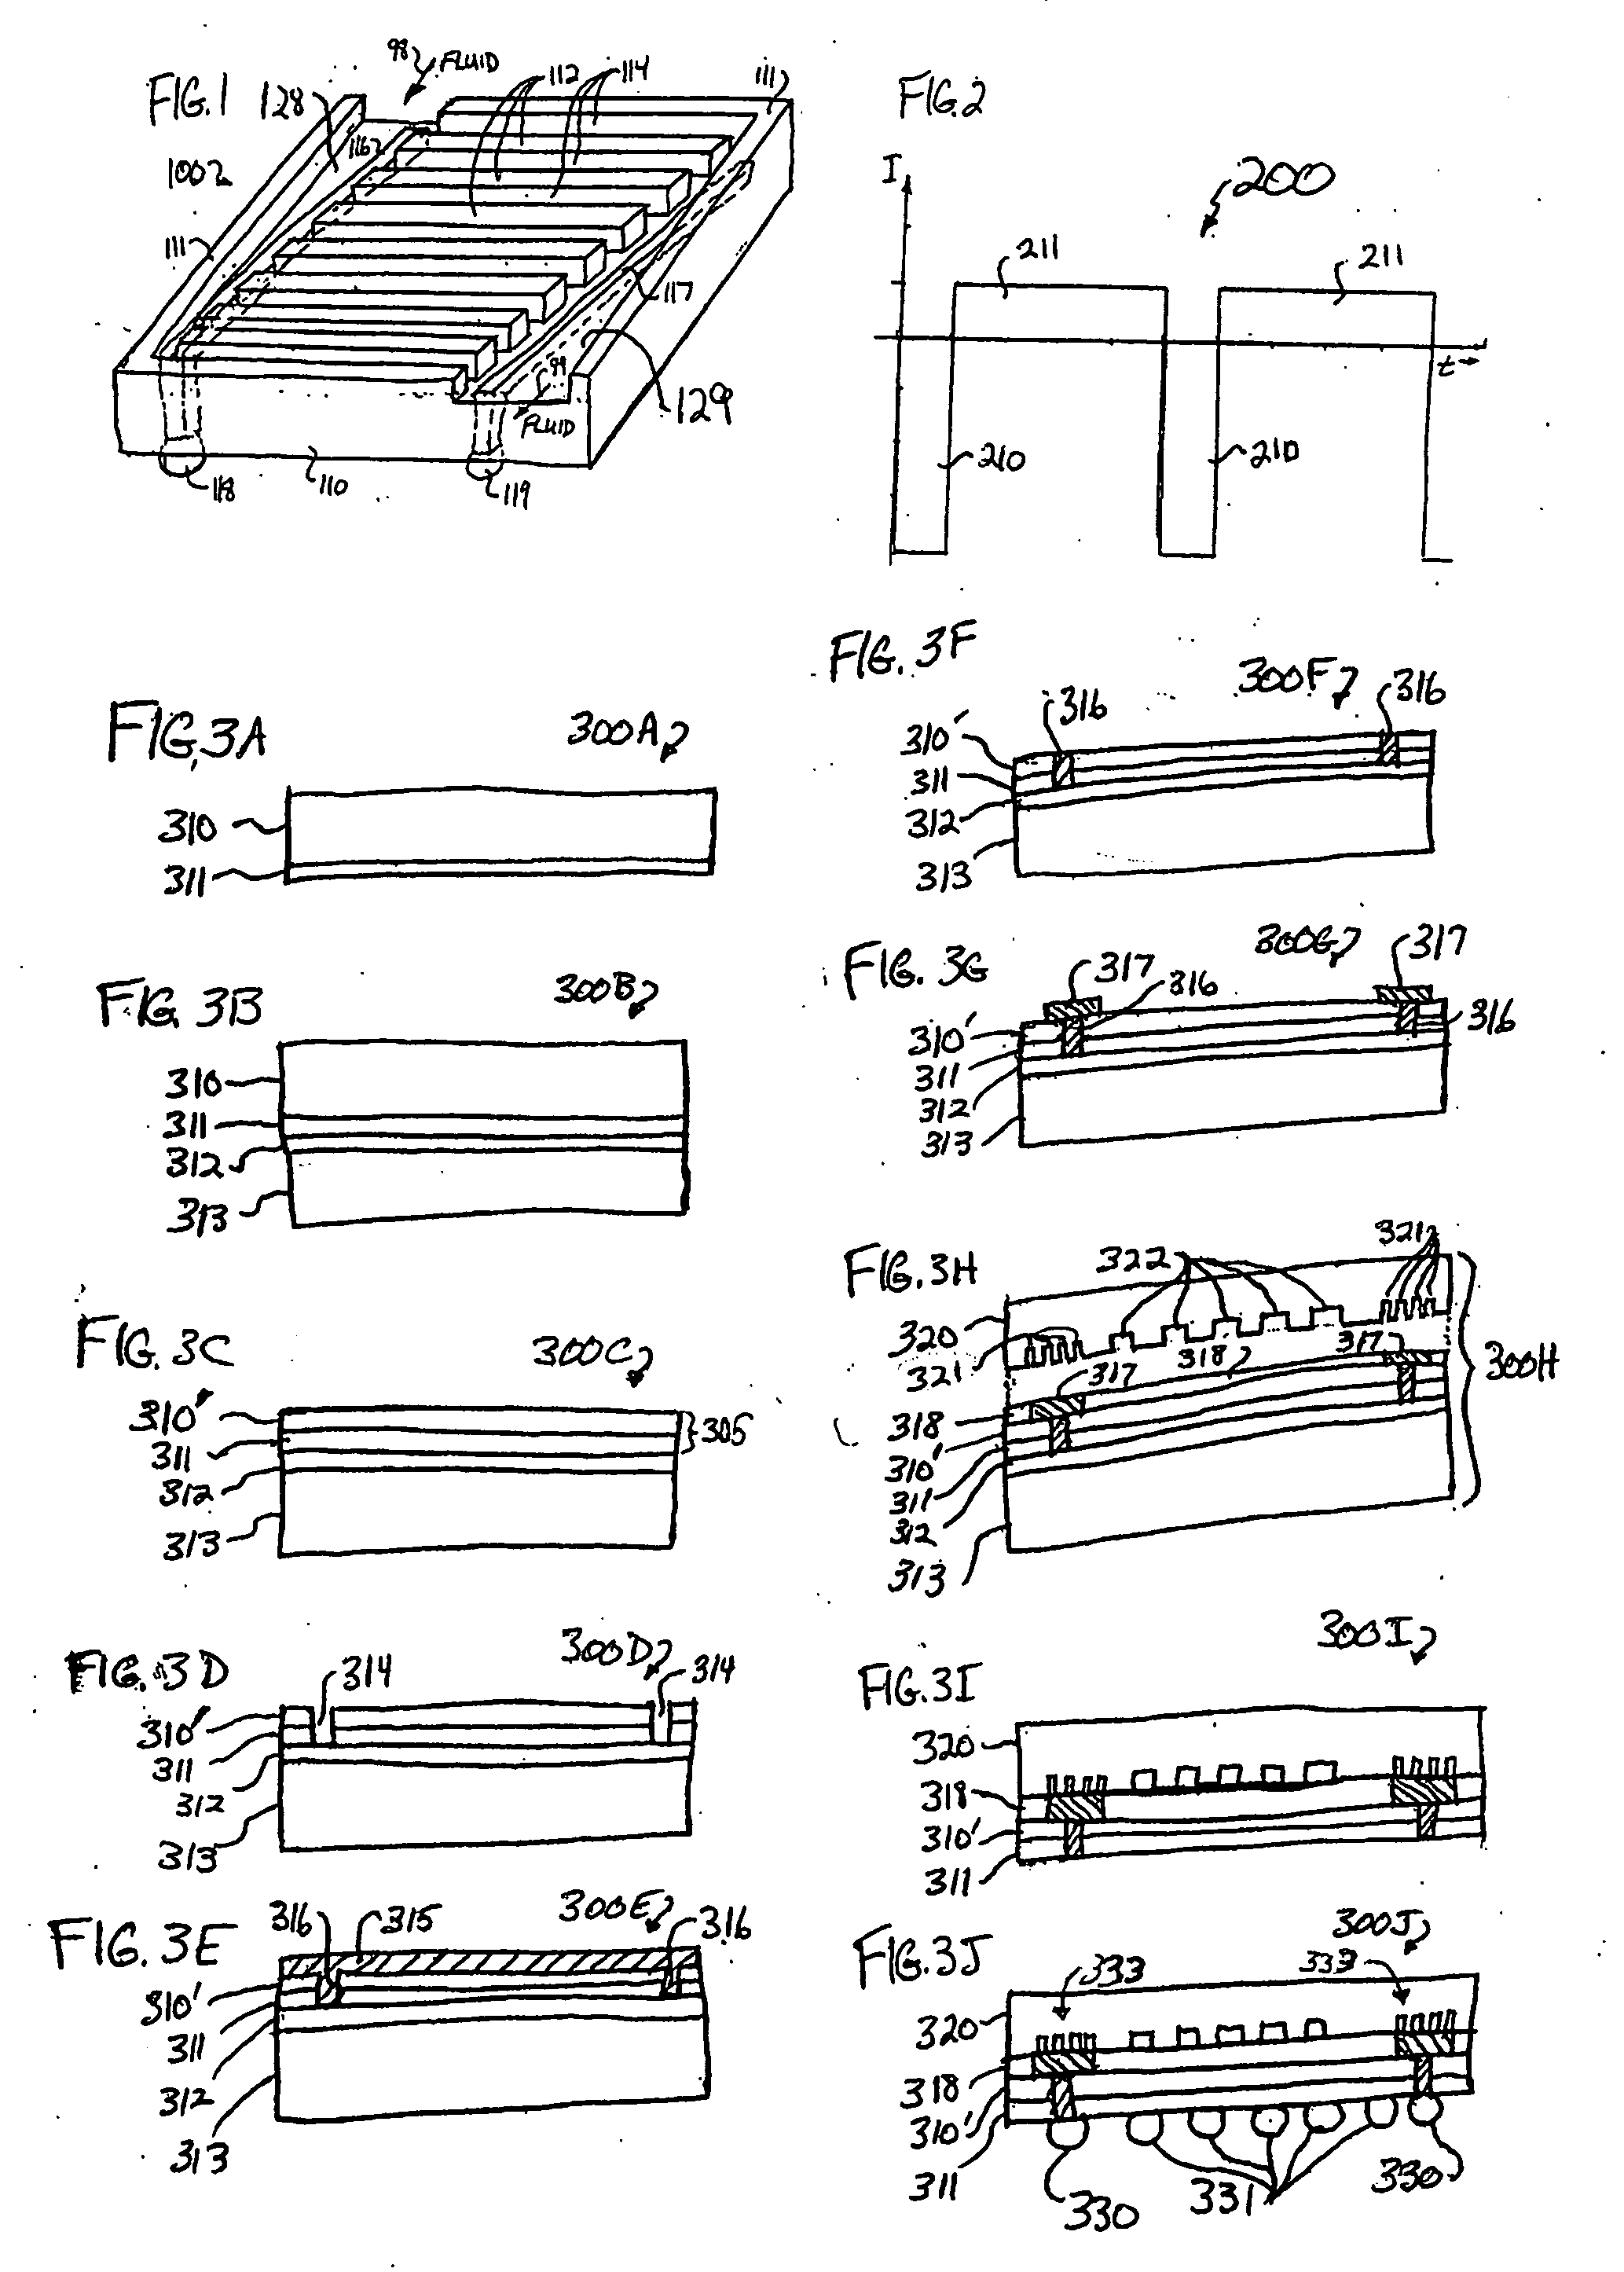 Apparatus and method integrating an electro-osmotic pump and microchannel assembly into a die package